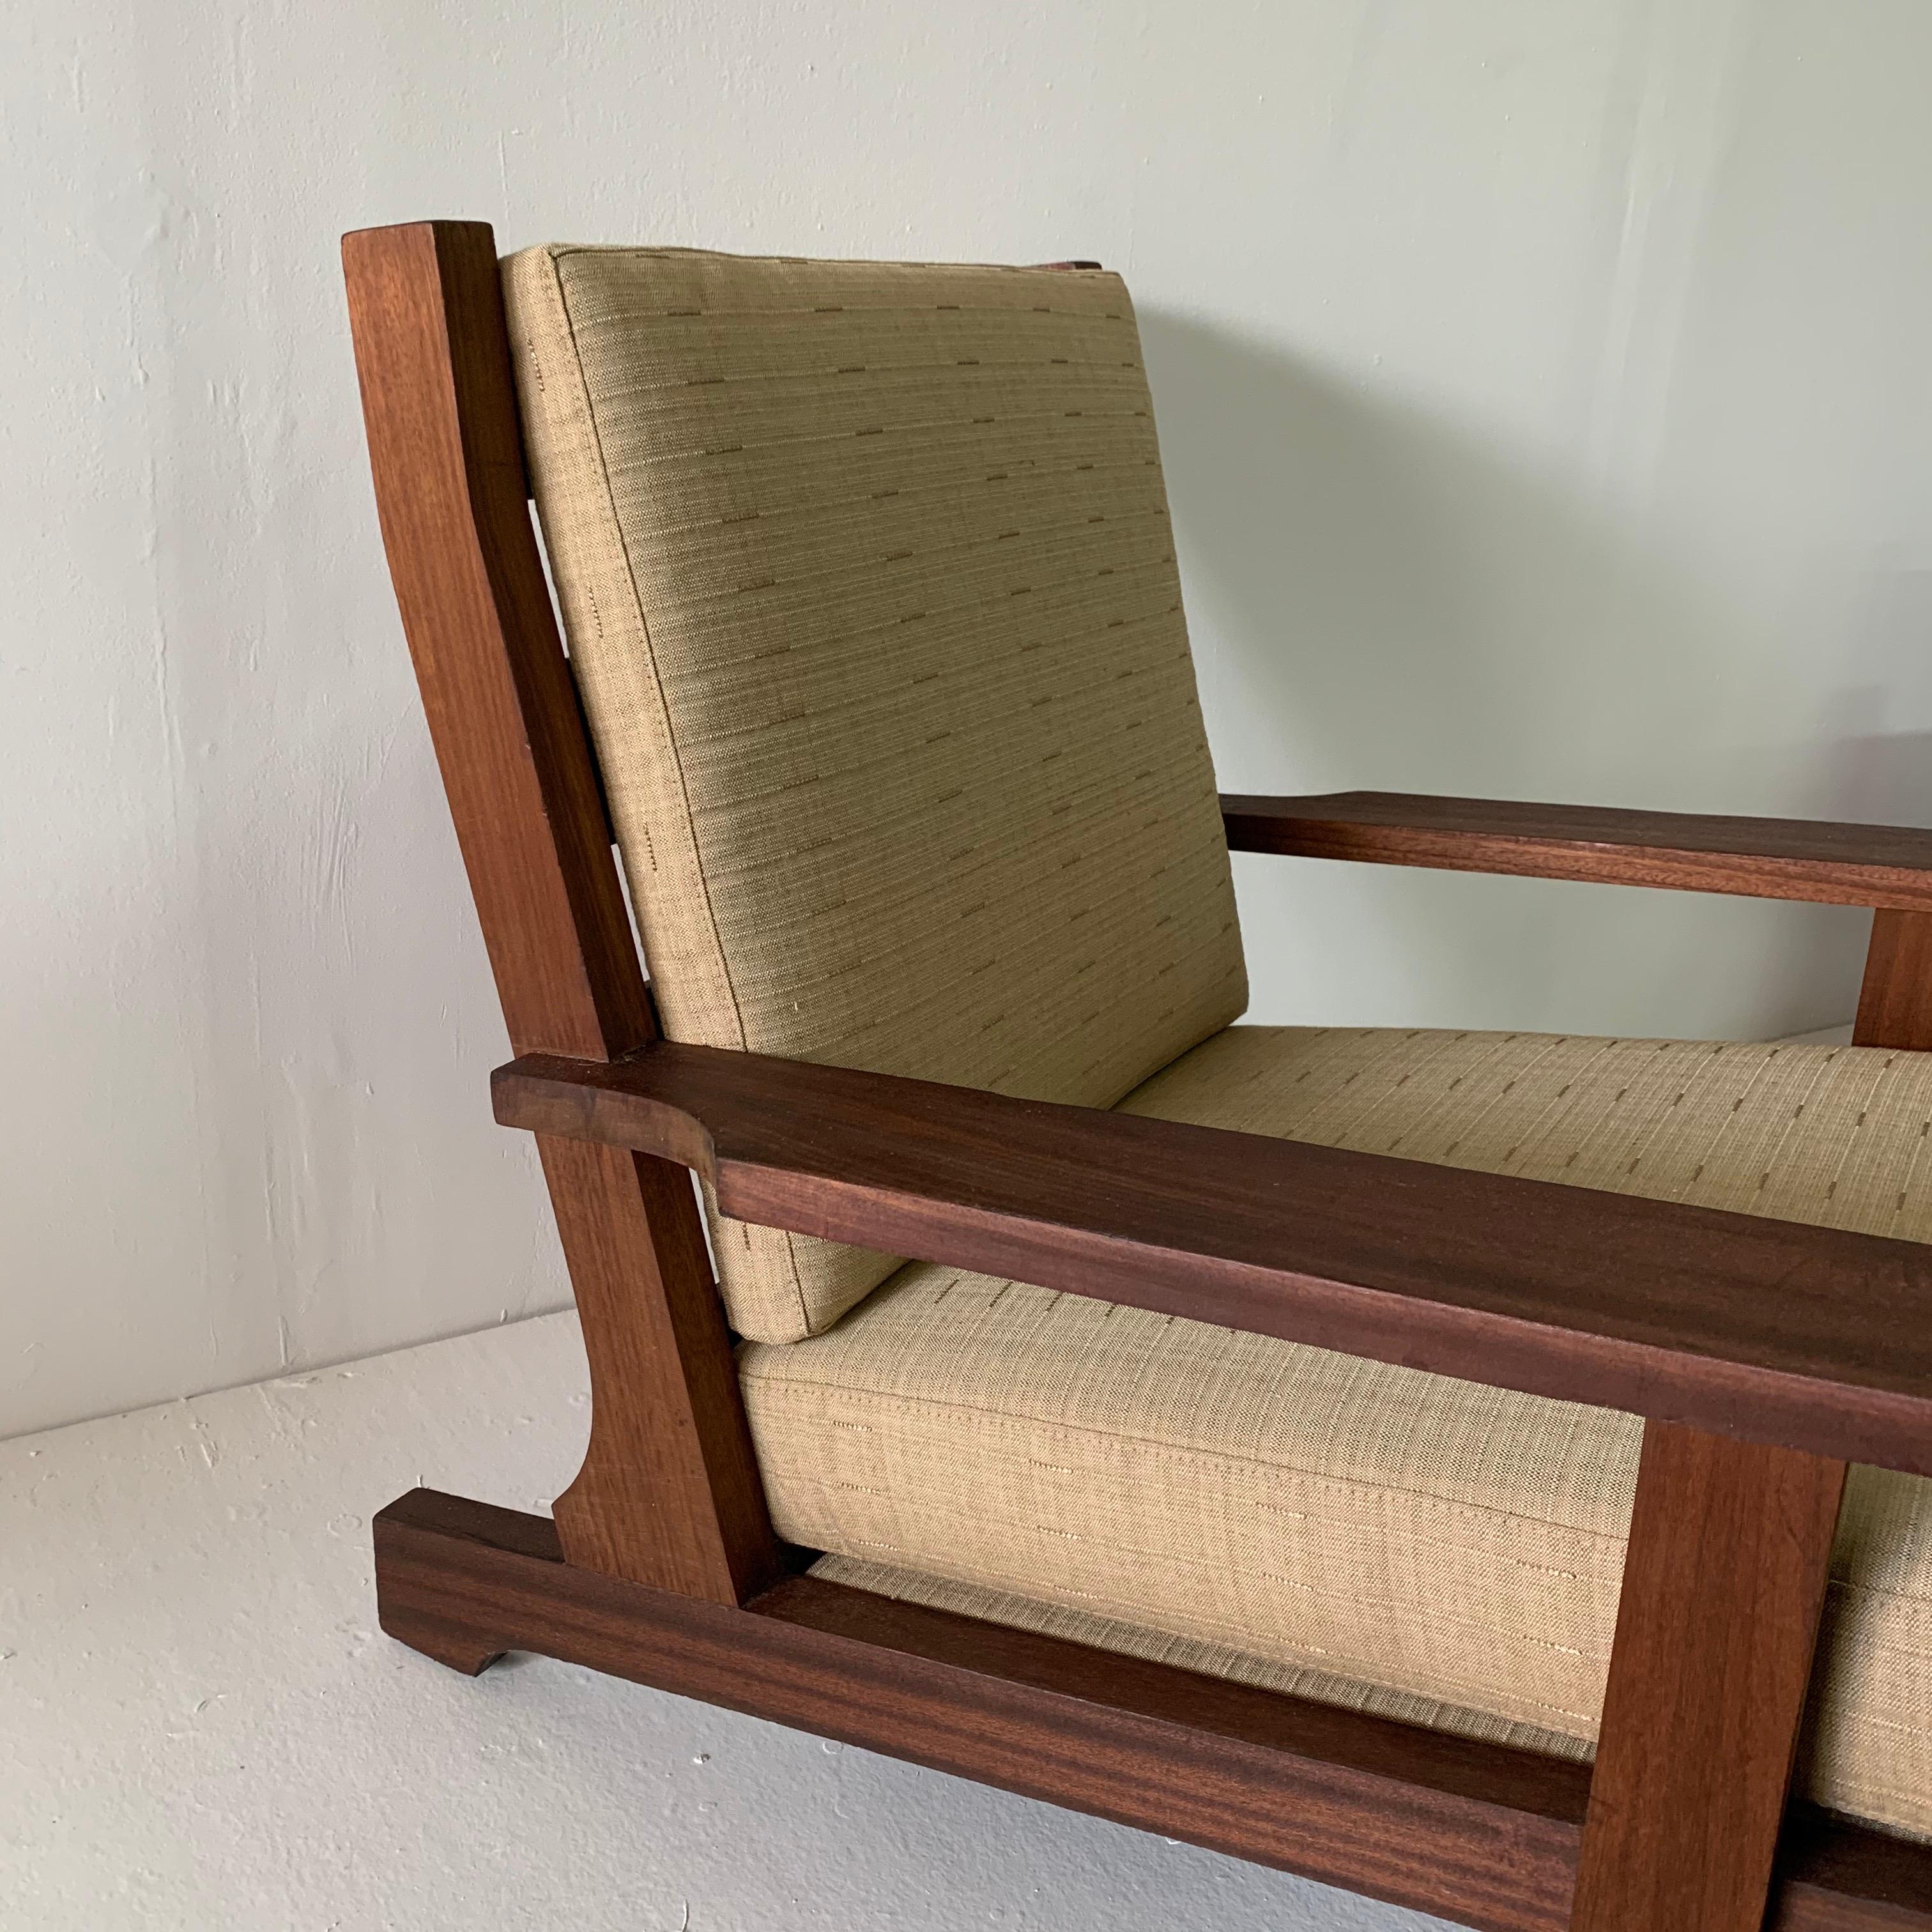 This is a wide, deep and low all teak armchair from France, made in 1960s. Finished with a beach-vibe fabric in neutral tones. This was acquired from the Estate of Amy Perlin, New York. There is a second similar style chair with a lower back